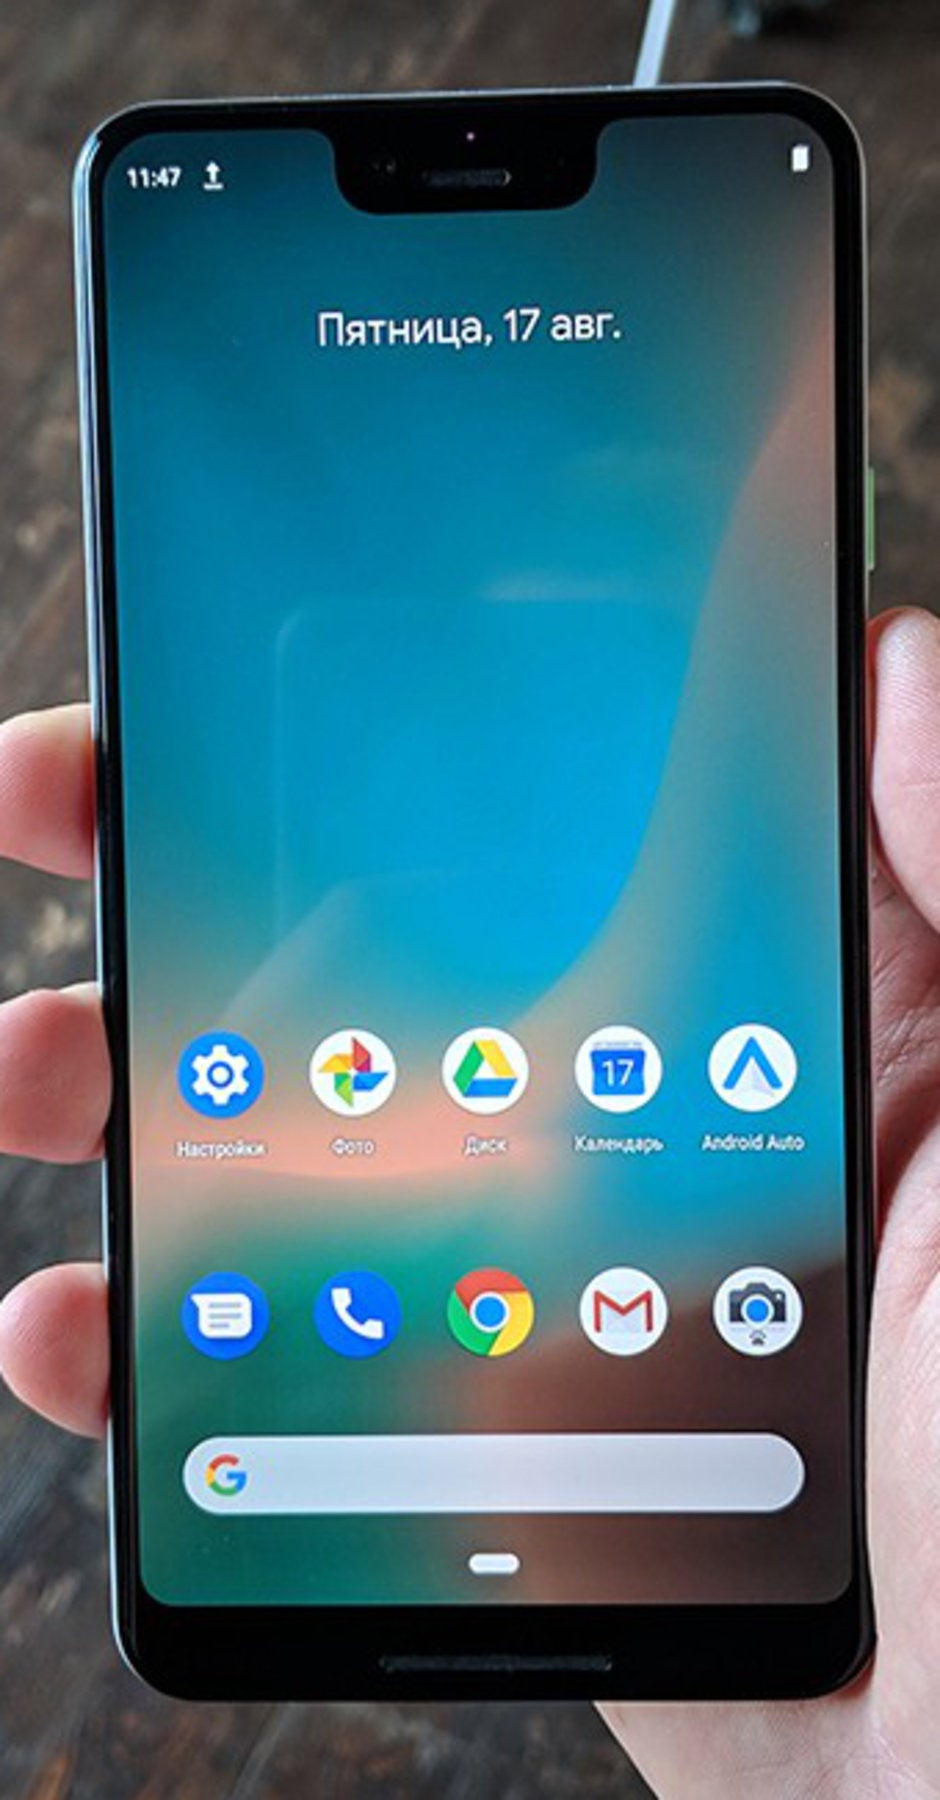 Picture source Rozetked - So, what do you think about this Pixel 3 XL?